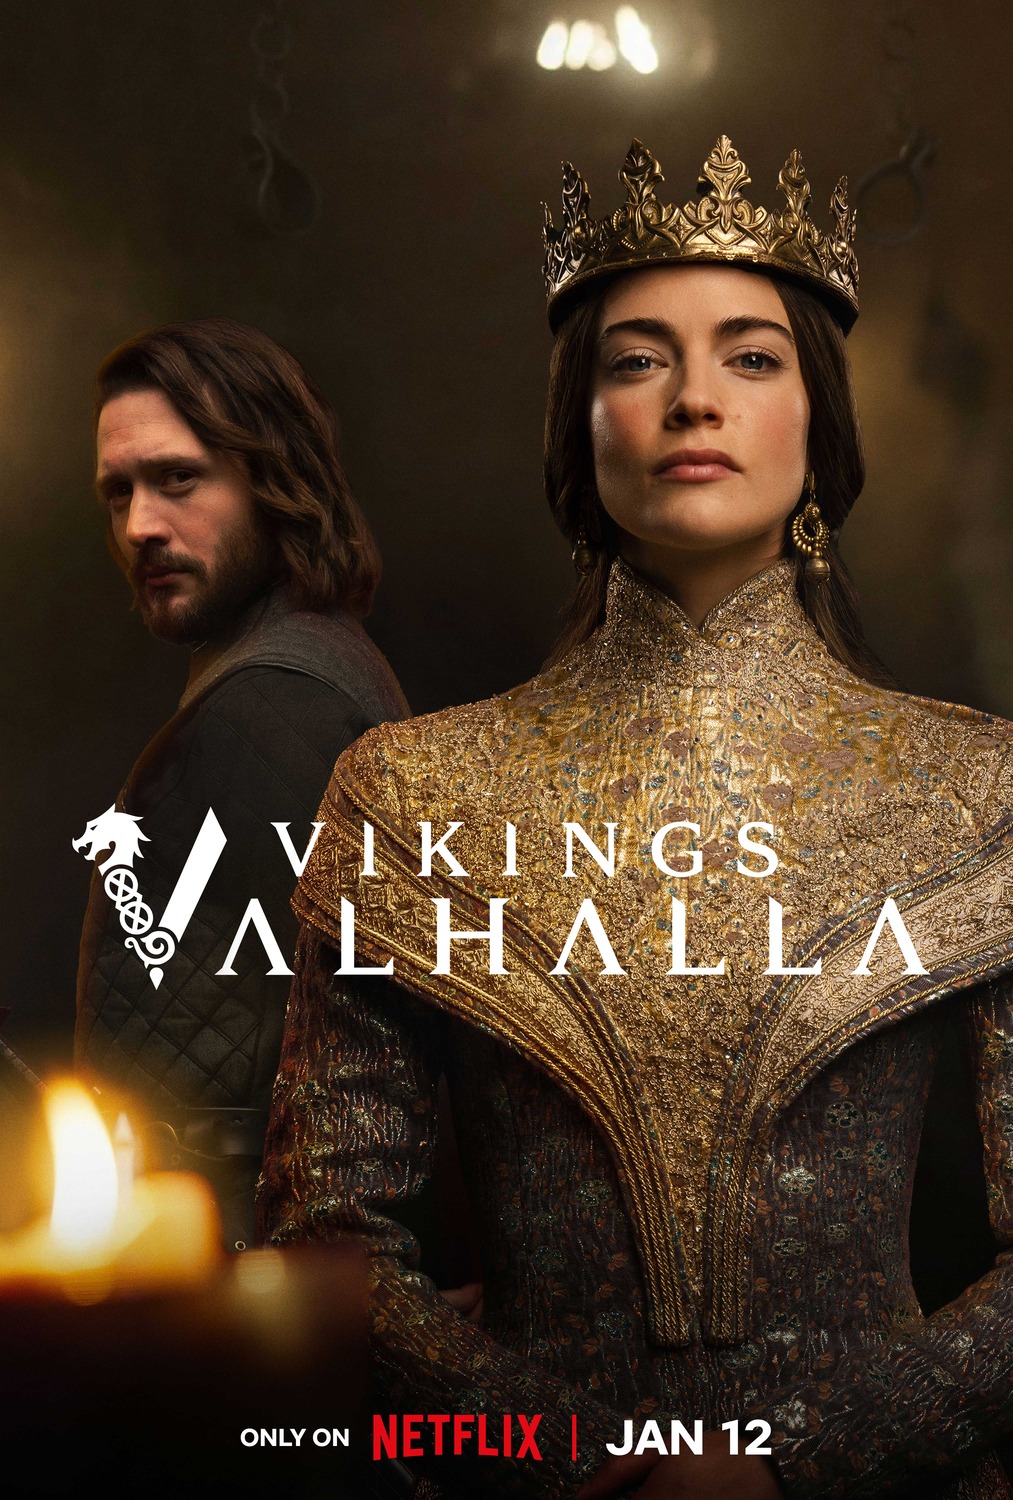 Extra Large TV Poster Image for Vikings: Valhalla (#17 of 18)